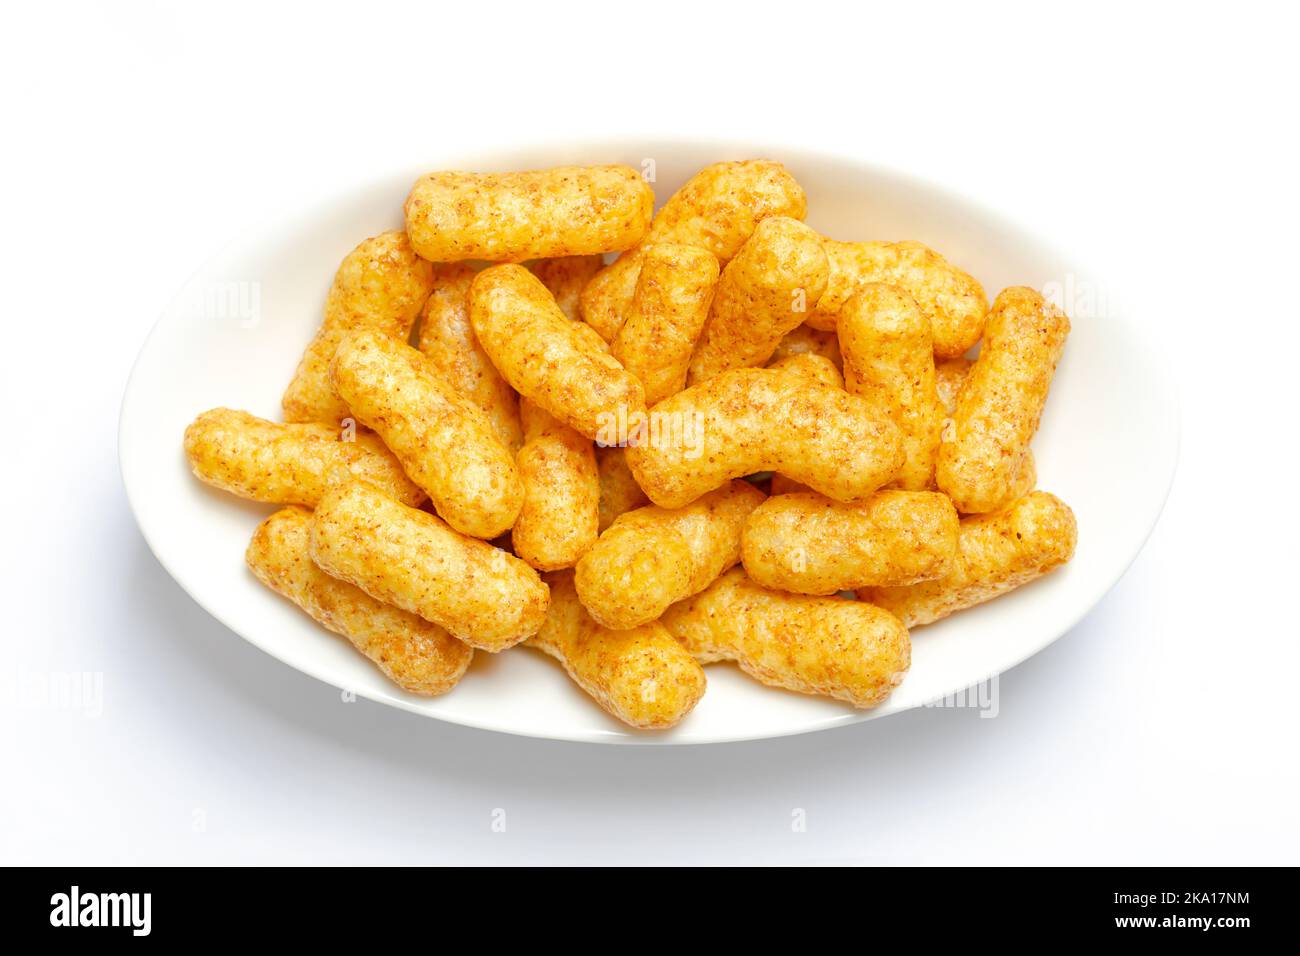 Peanut flips, in a white bowl. Also known as Bamba, peanut puffs or snips, is a puffed, peanut-flavored corn snack. Stock Photo